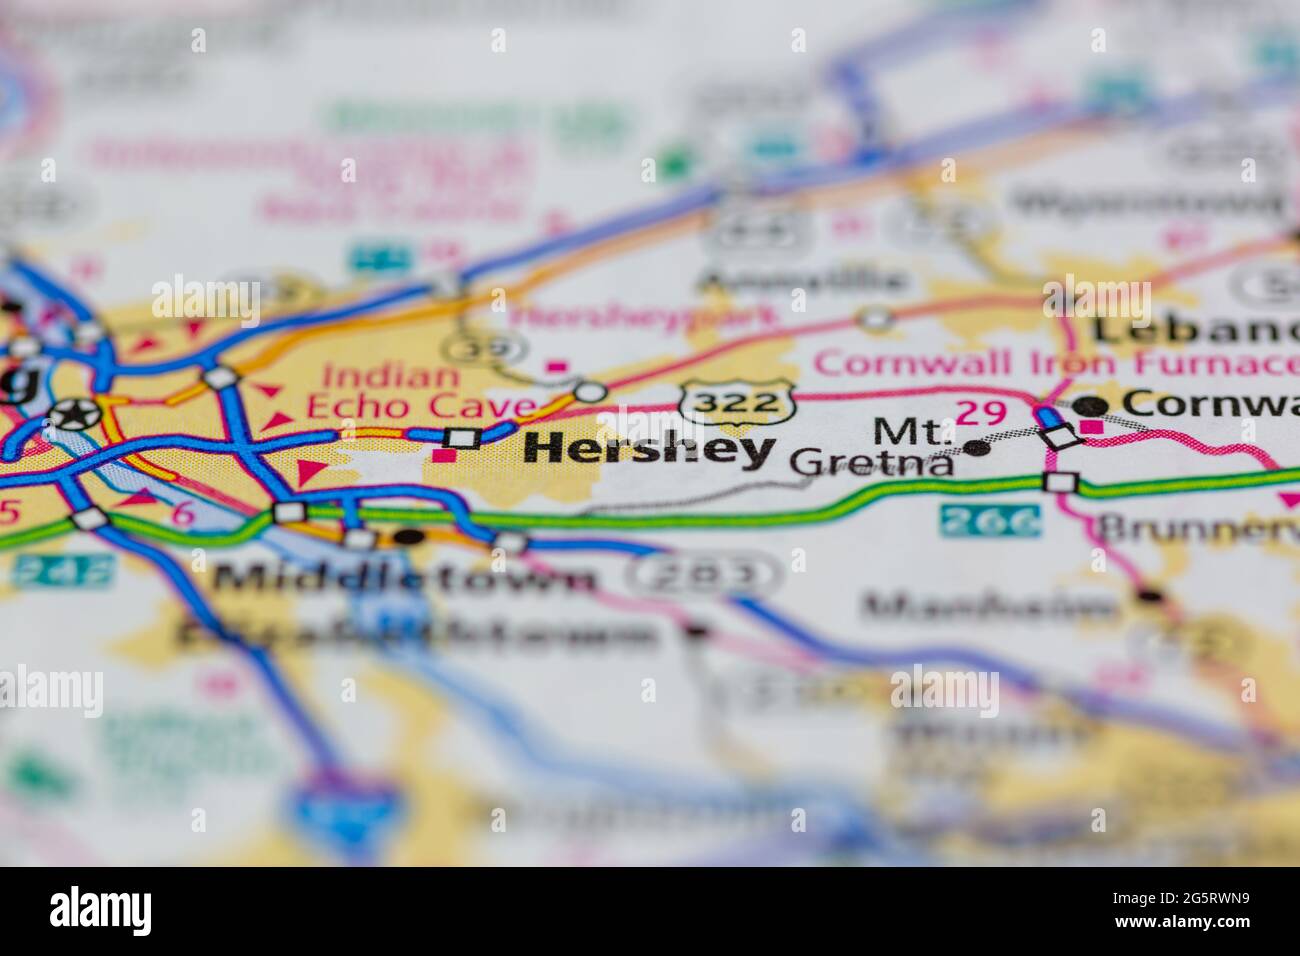 Hershey Pennsylvania Usa Shown On A Geography Map Or Road Map 2G5RWN9 